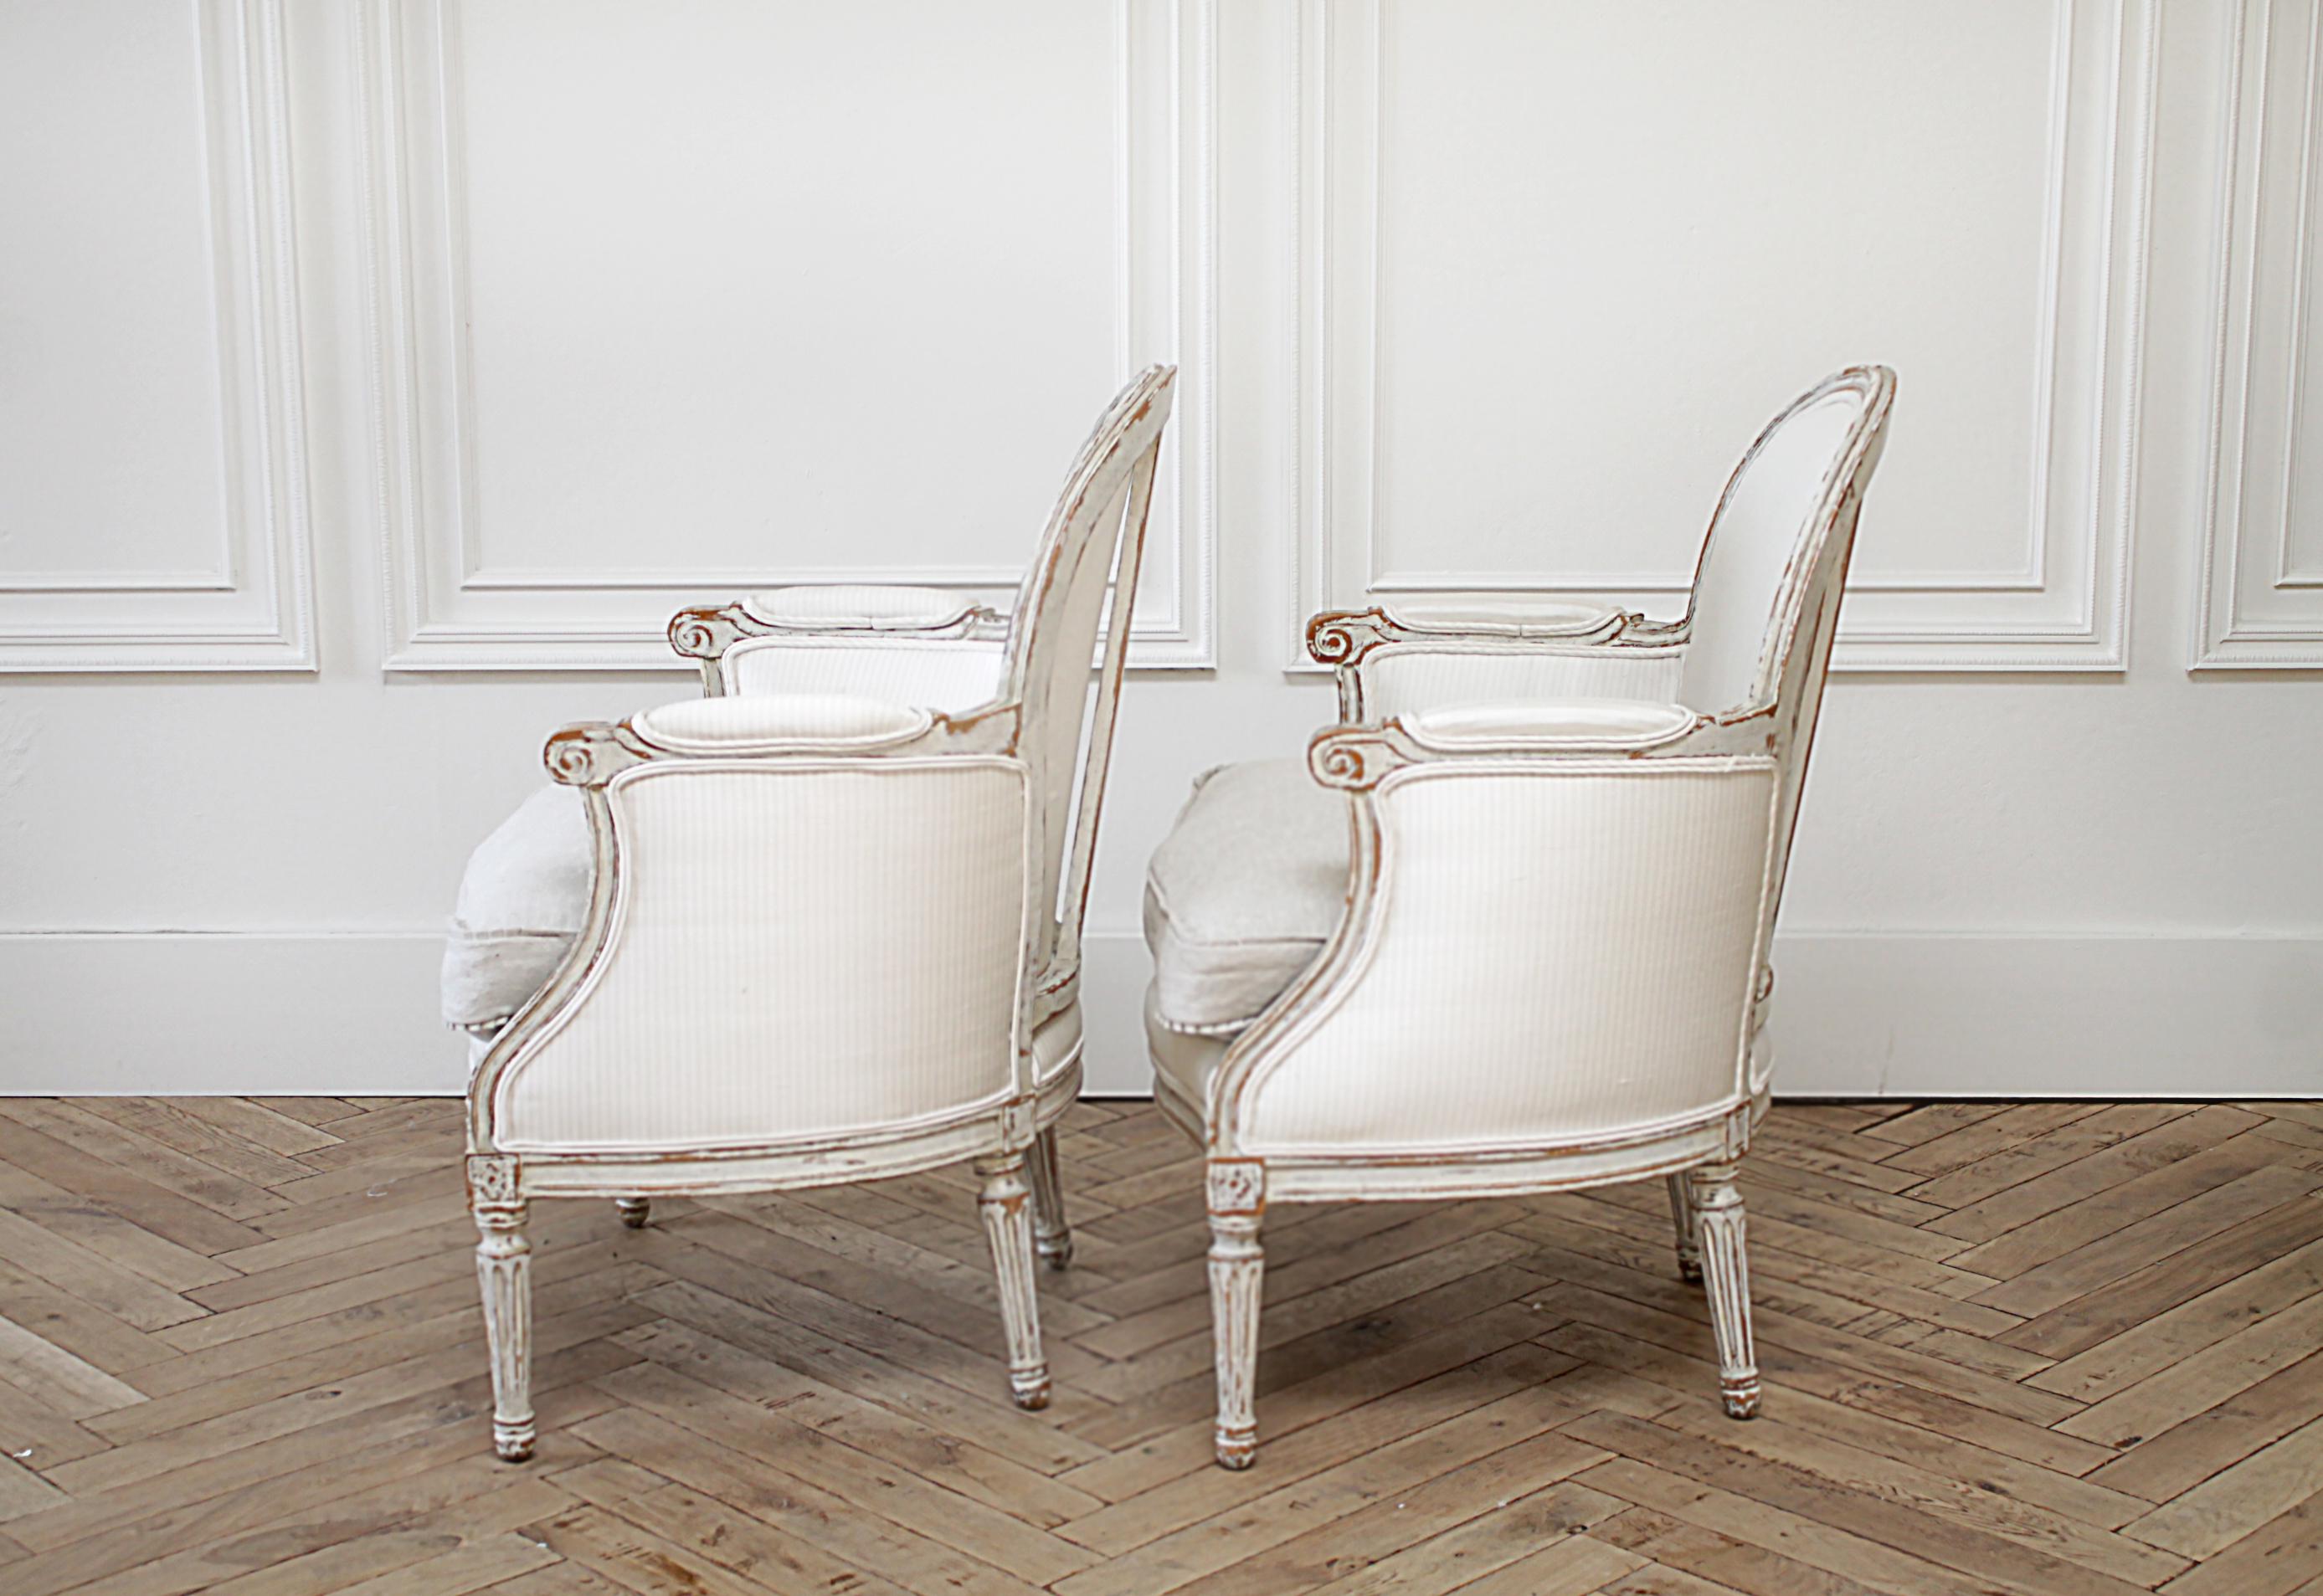 Antique Louis XVI style bergère chairs in silk and linen upholstery.
Original creamy painted patina with bare wood showing through. We reupholstered these in a neutral tonal stripe 100% silk, and linen slip covered seat cushion. The seat cushion